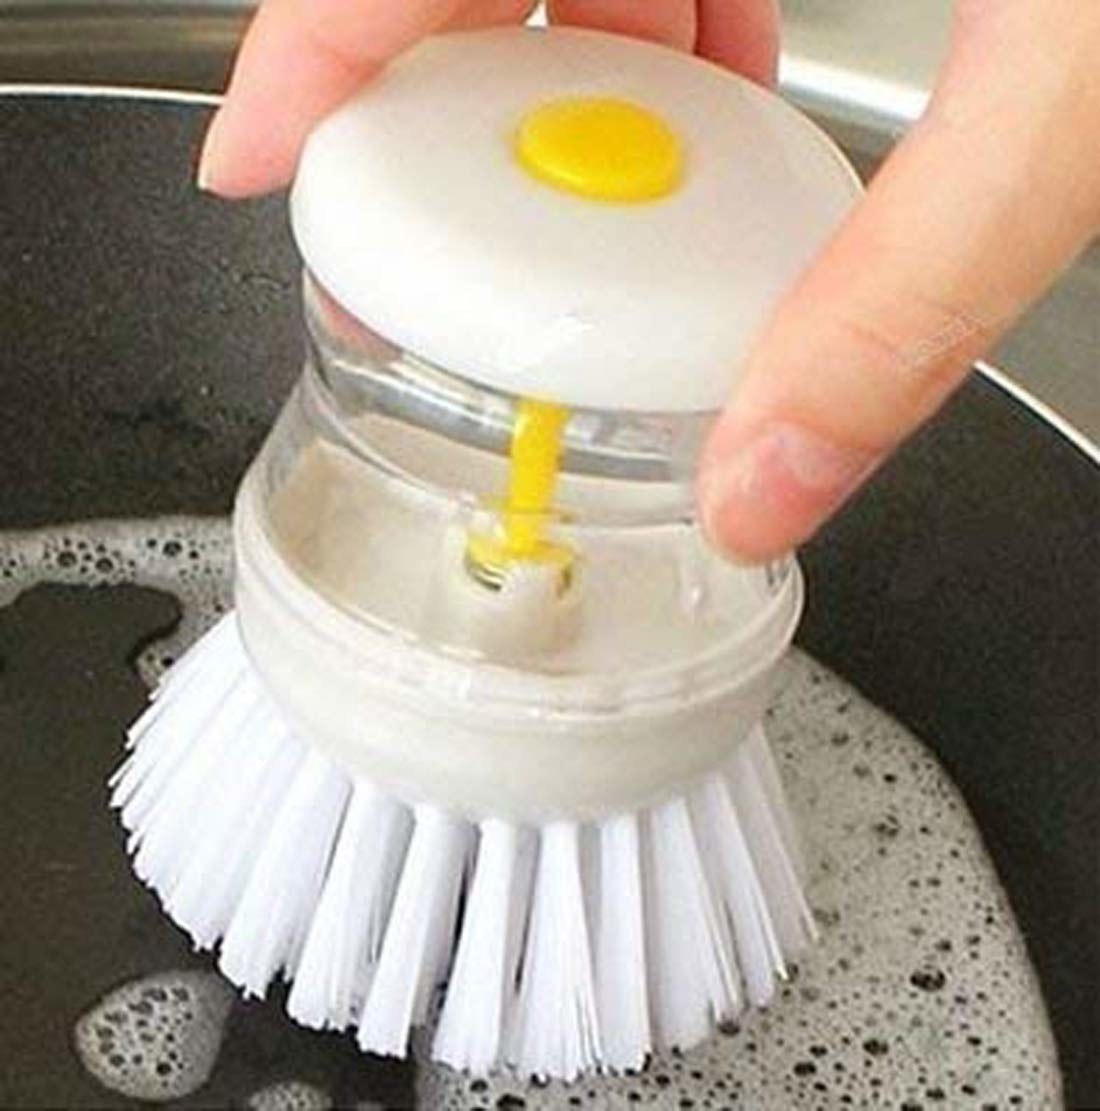 Brush with dispenser on top. Press button on dispenser to release soap.